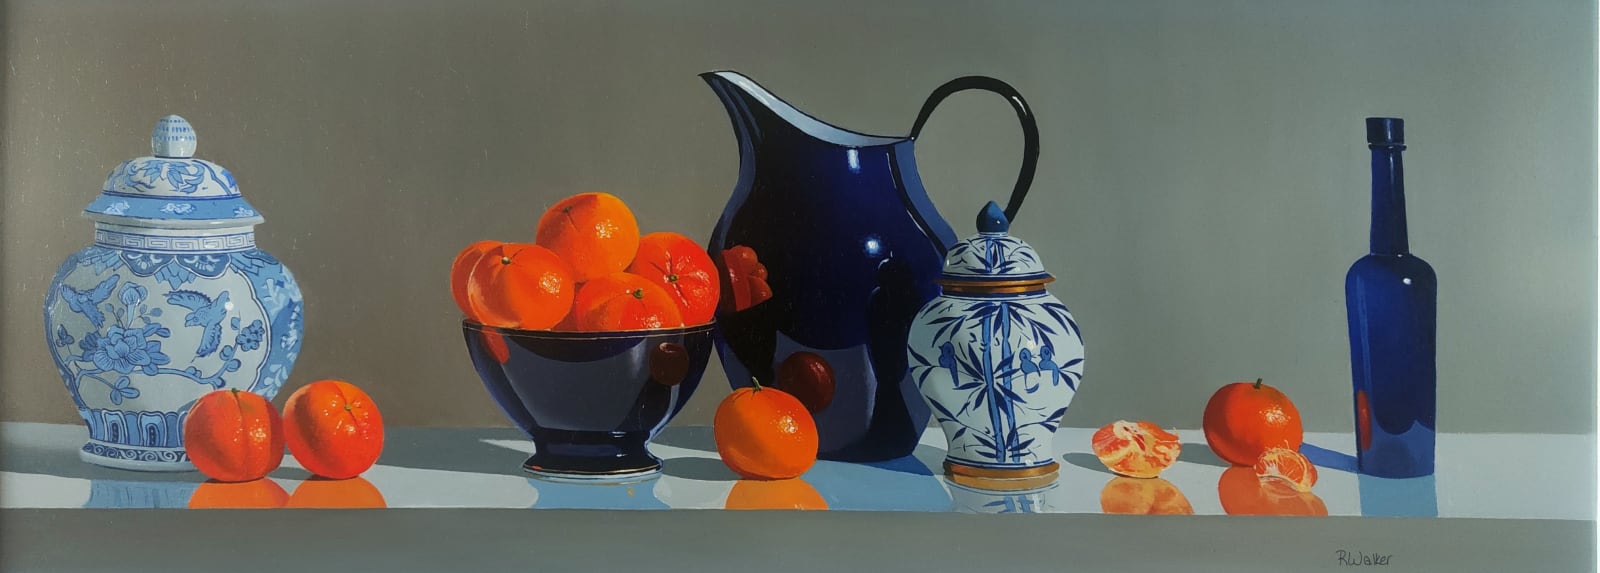 Rob Walker, Blue enamel with Oriental pottery and Clementines